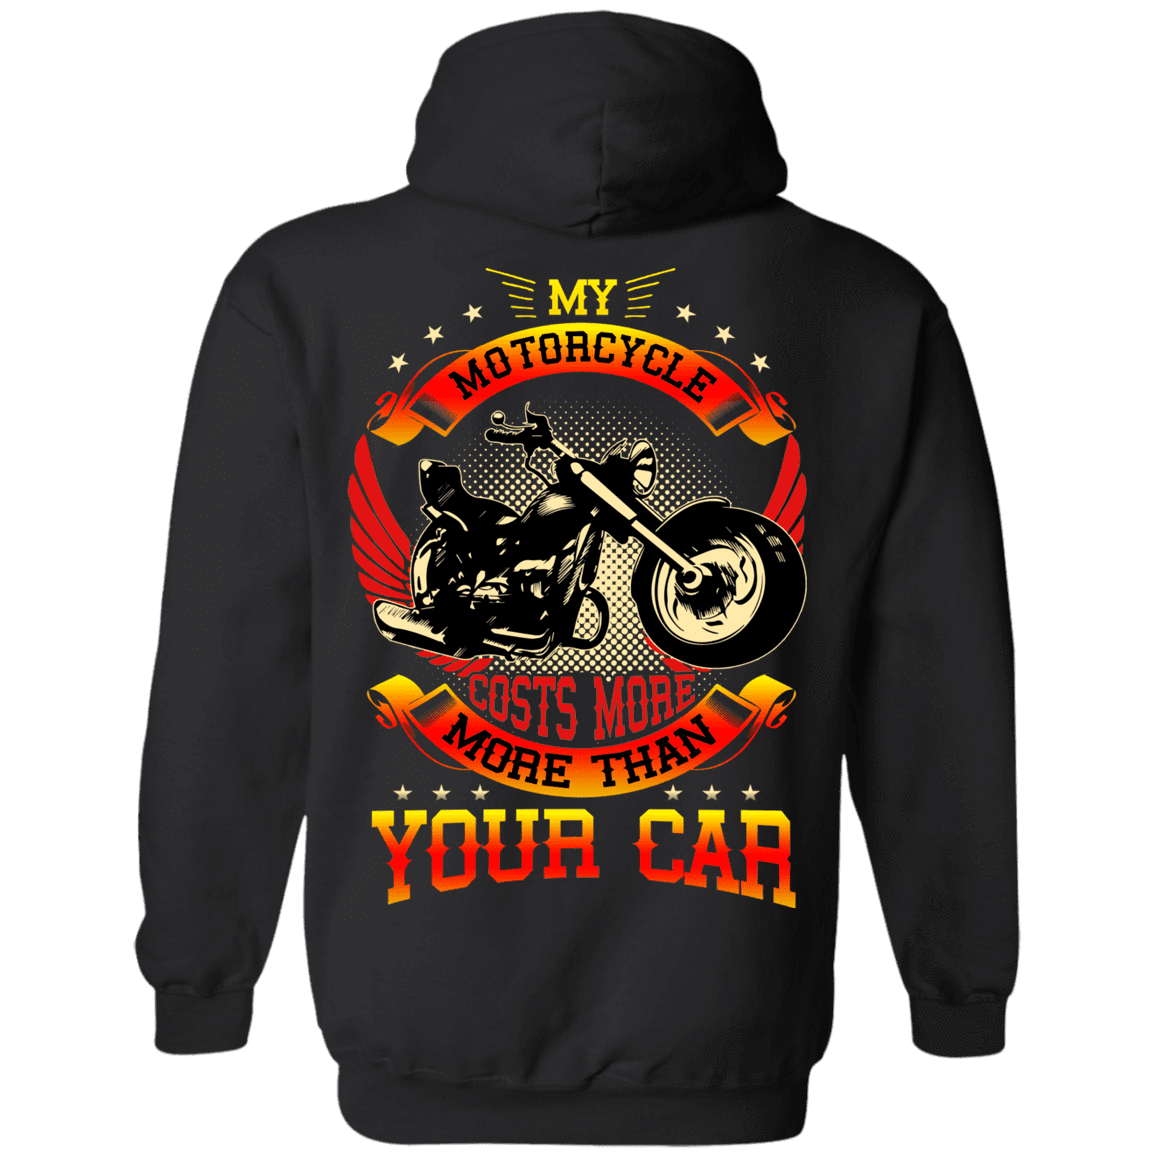 My Motorcycle Costs More Than Your Car T-Shirt - American Legend Rider